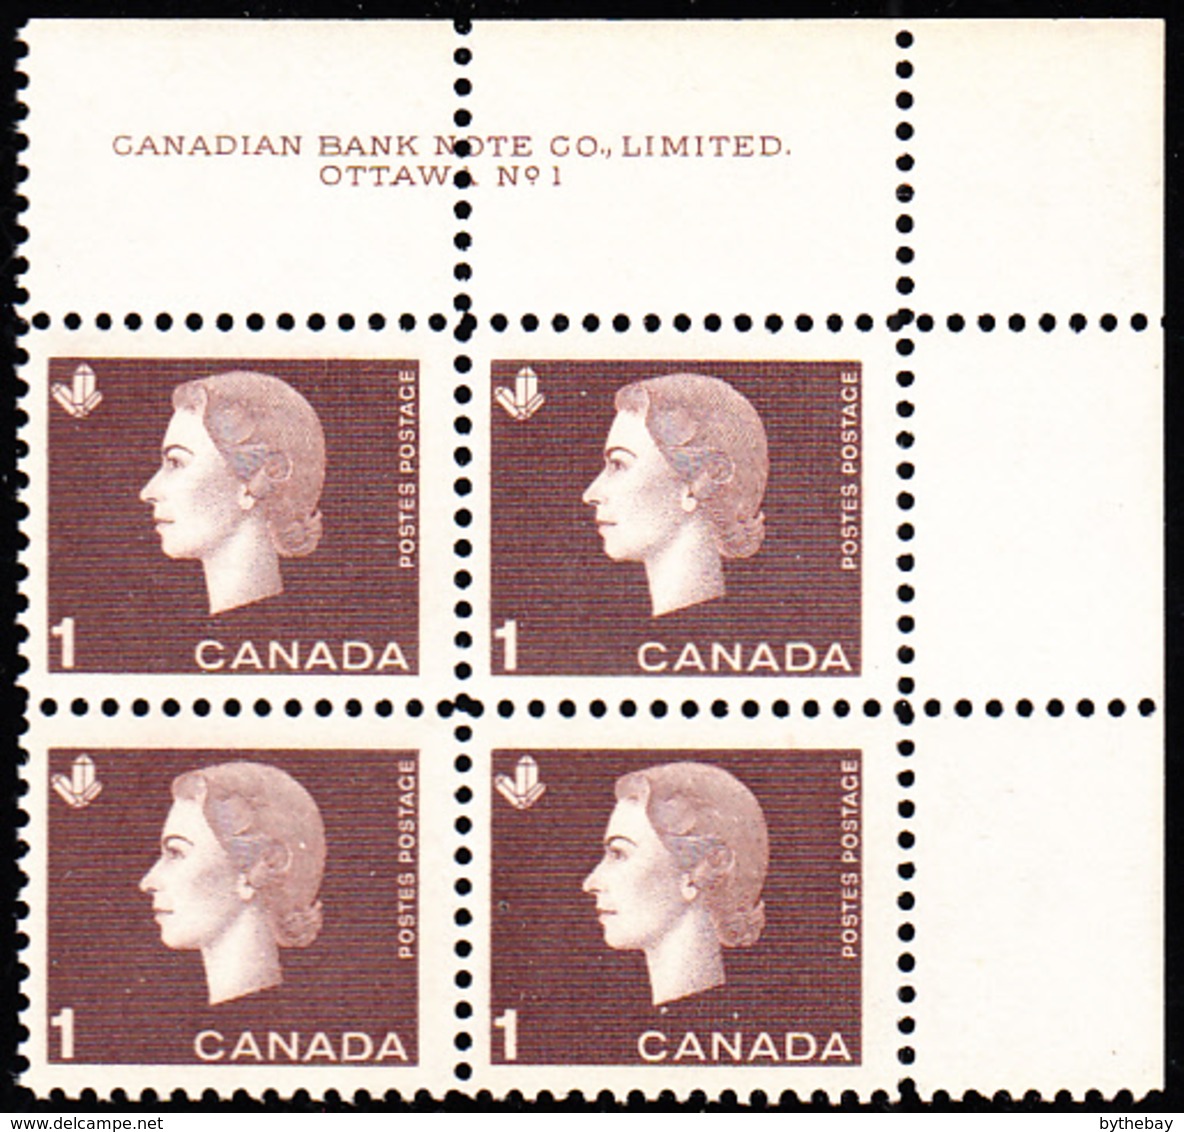 Canada 1963 MNH Sc #401 1c QEII Cameo Plate #1 UR - Plate Number & Inscriptions